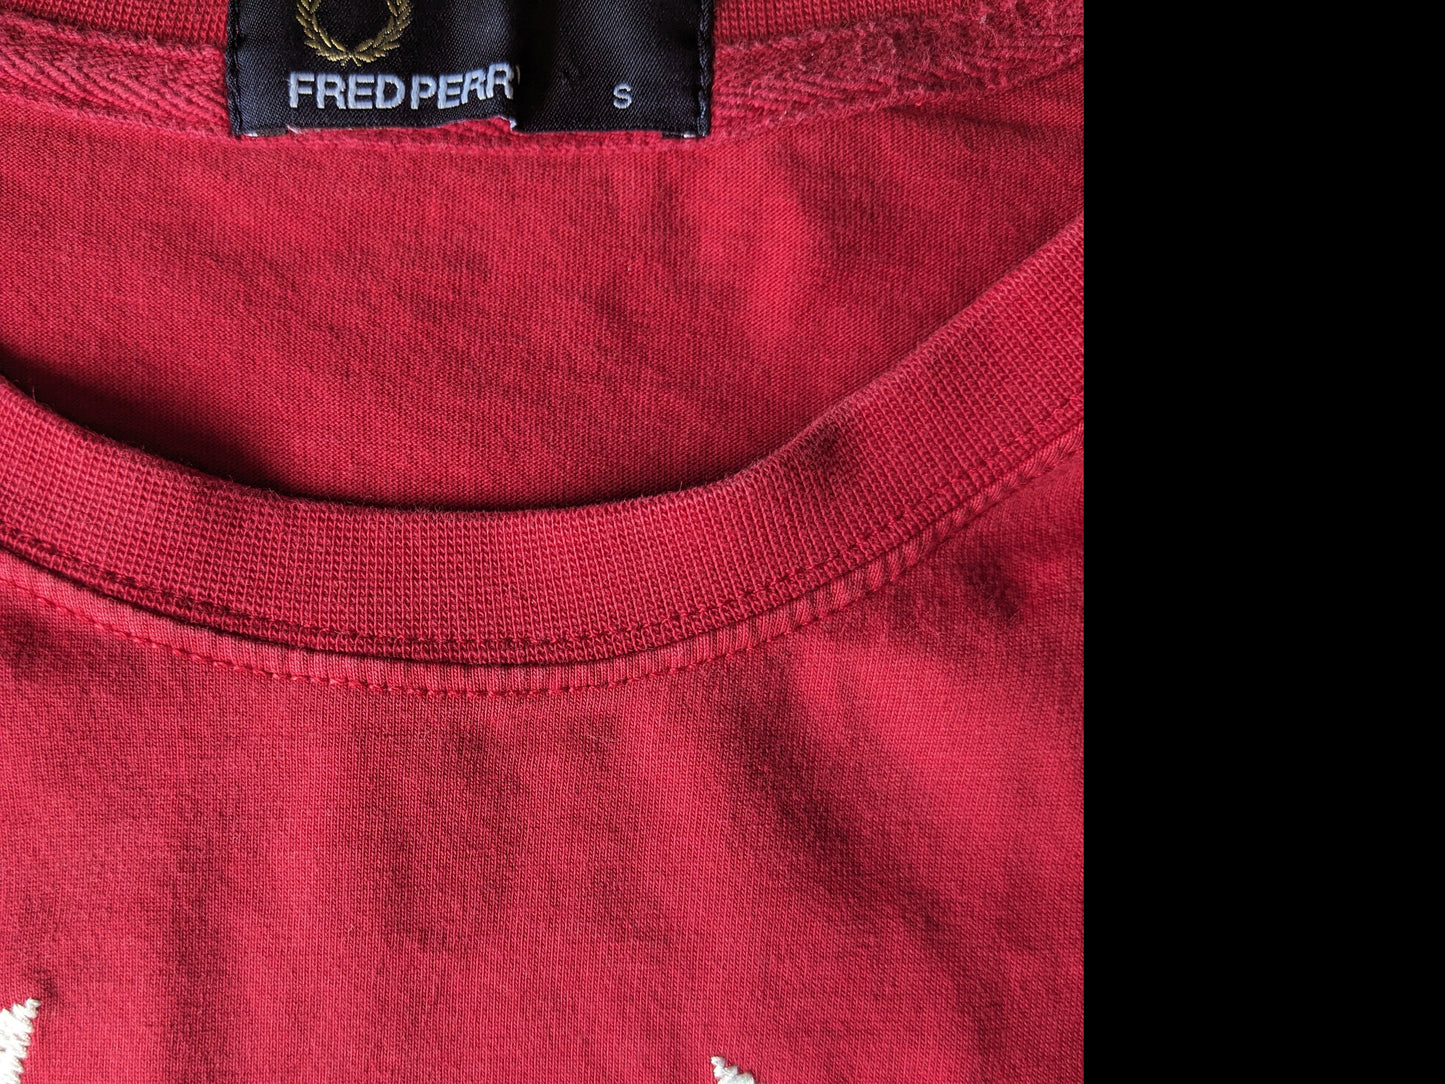 Chemise Fred Perry. Colore rouge avec une application blanche. Taille S.